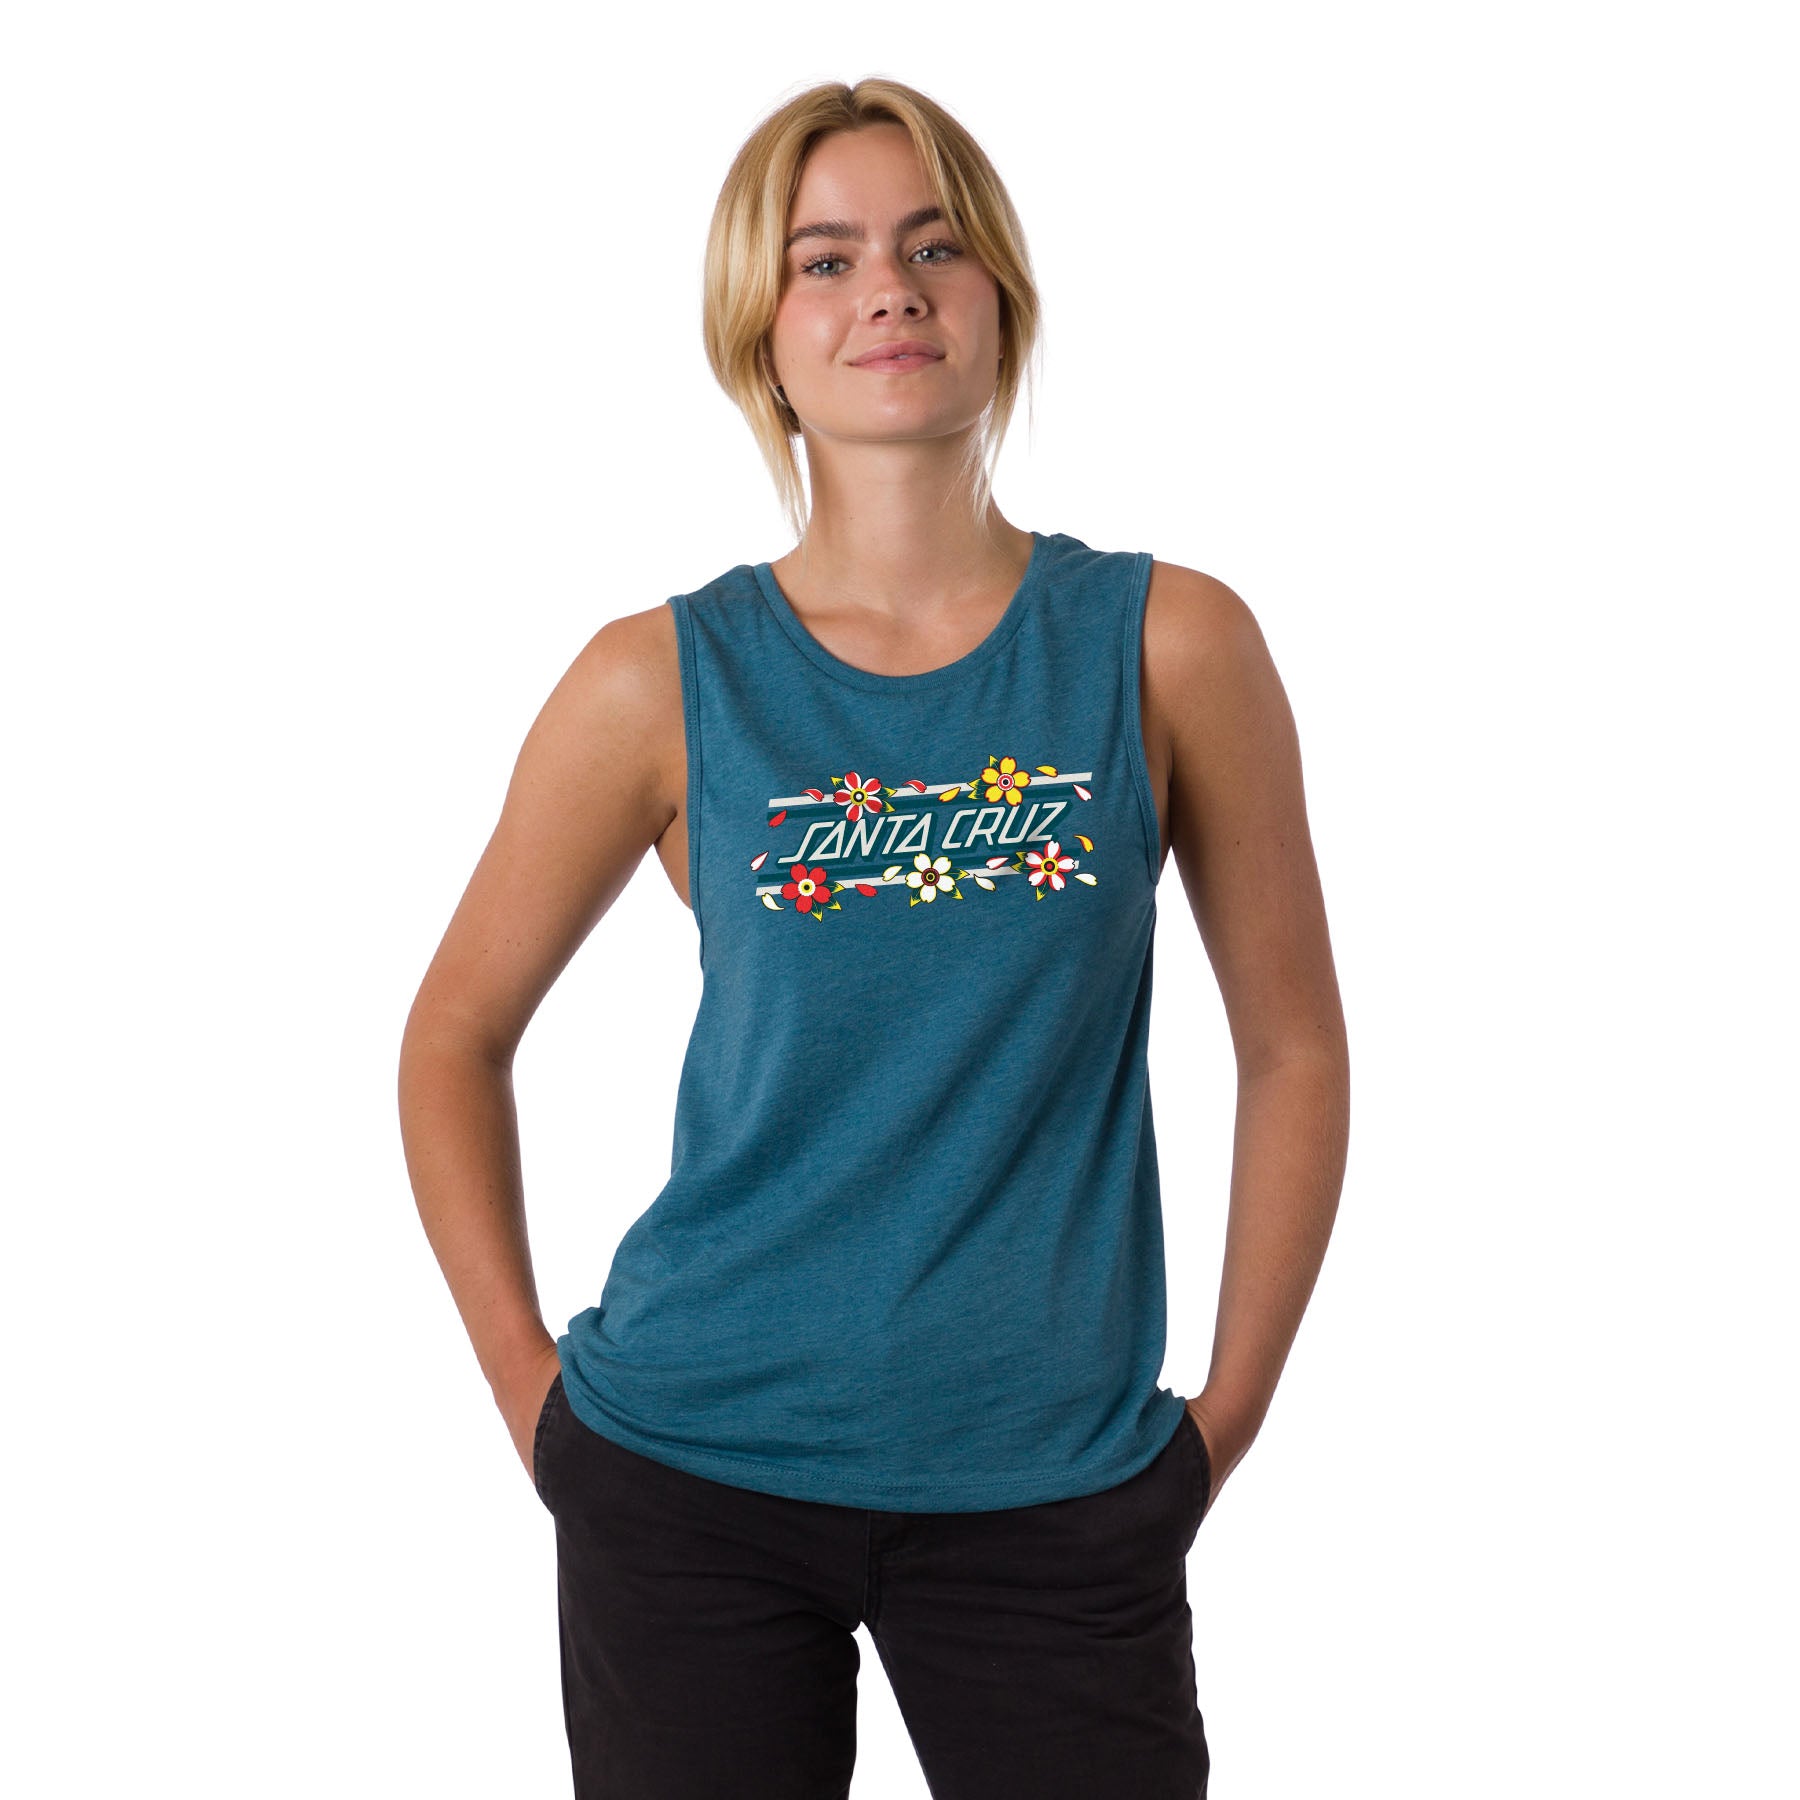 Navy Heather Disney Inside Out Complicated Emotions Womens Tank, BoxLunch  - BLUE